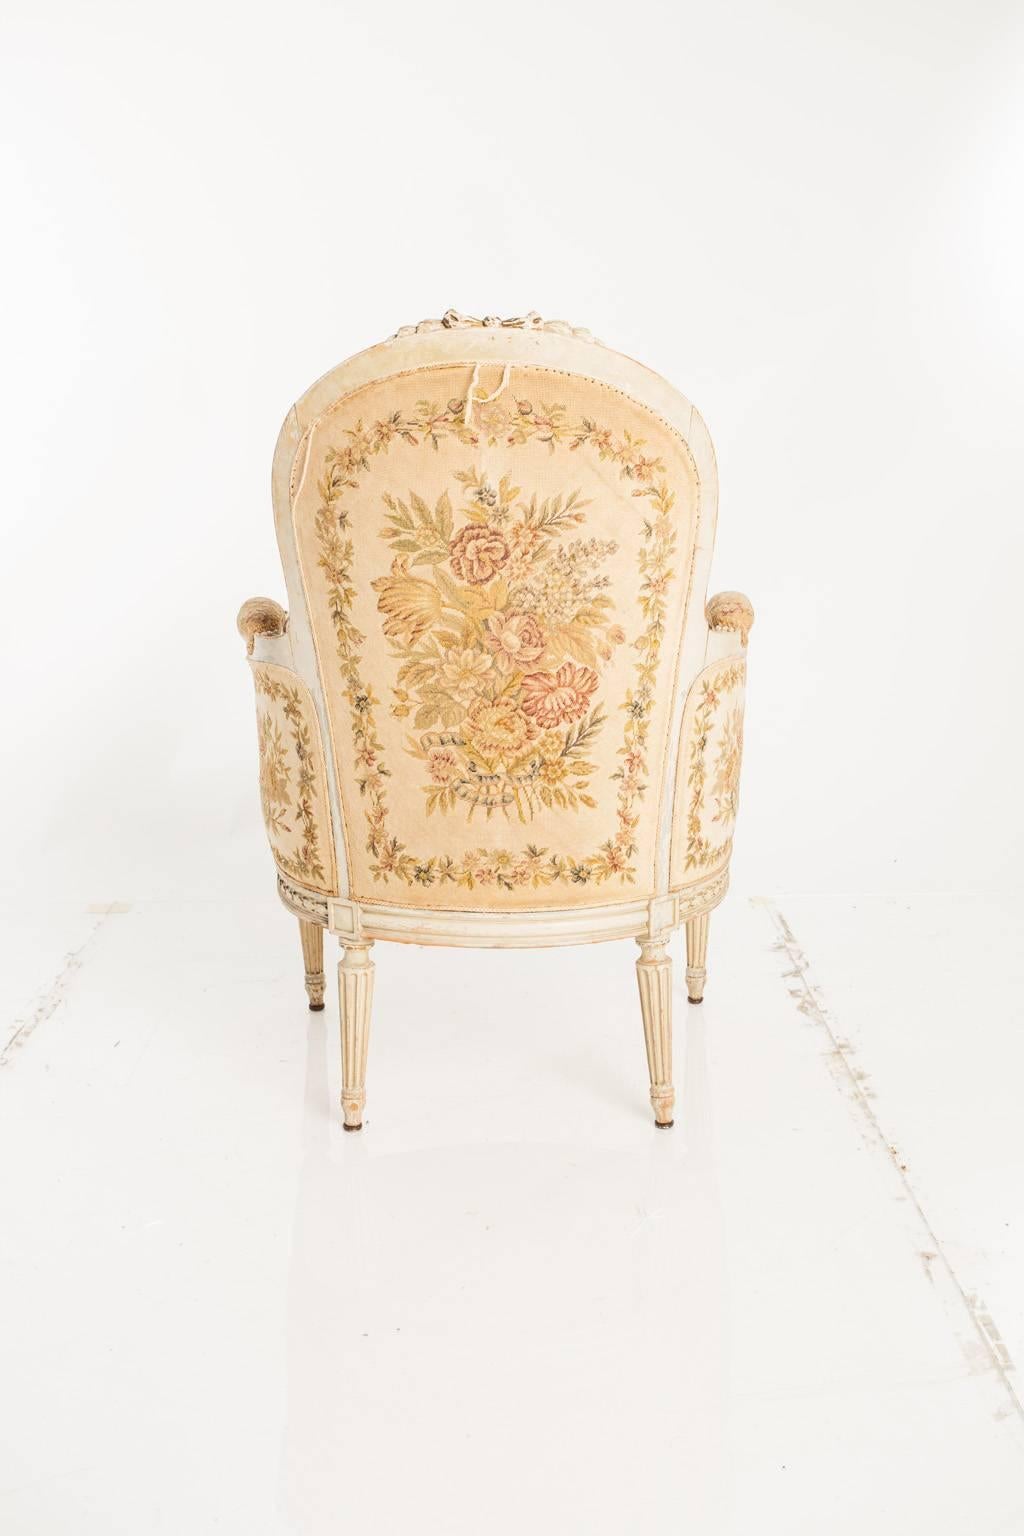 A pair of bergère chairs. Upholstery is decorated with a needlepoint floral motif.